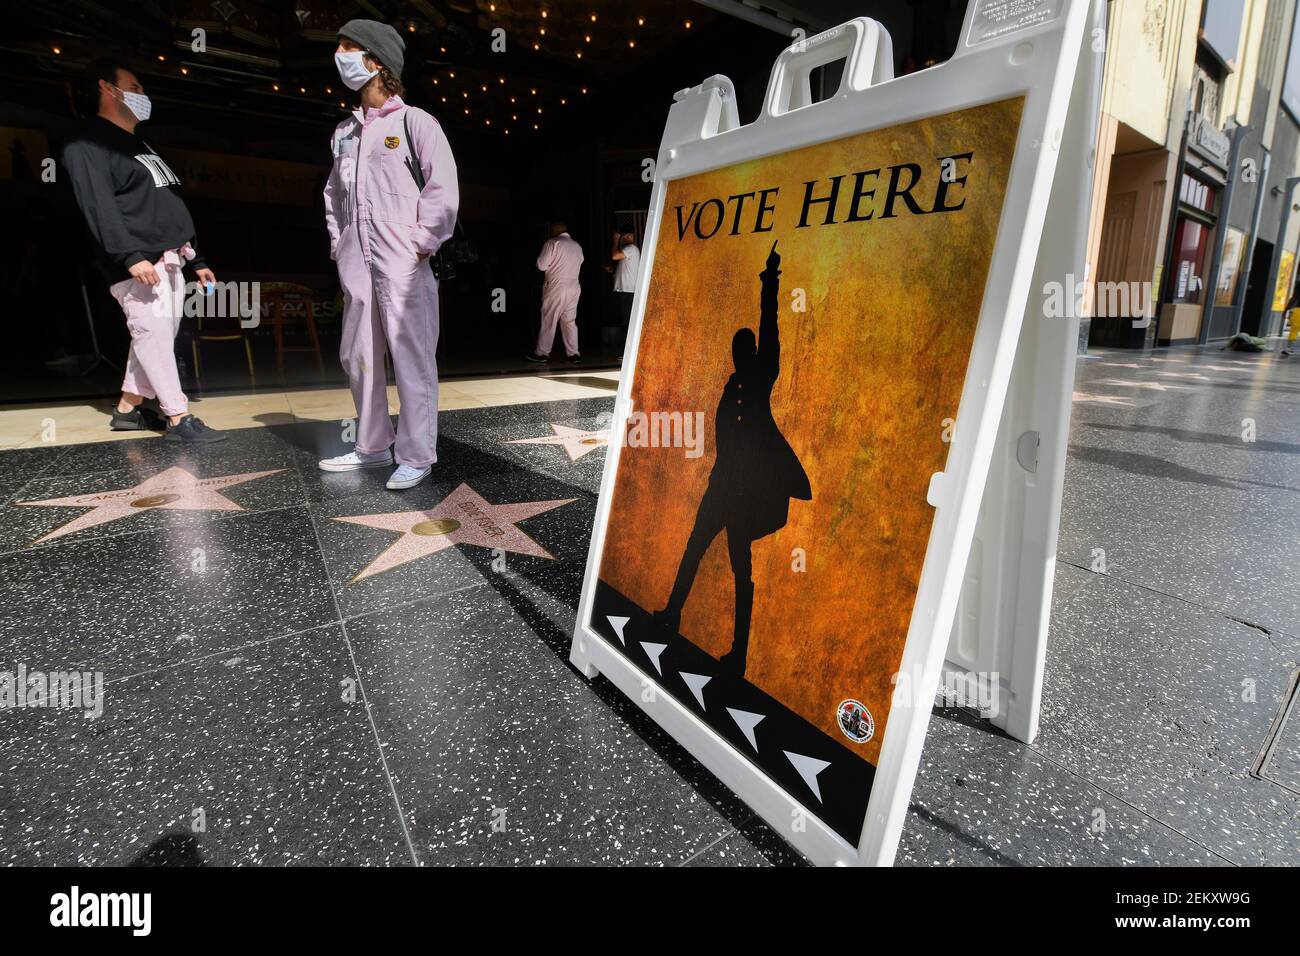 Nov 3, 2020; Los Angeles, California, USA; Drive through workers wait on the Hollywood Walk Of Fame in front of the Pantages Theater during election day for the 2020 Presidential election between Democratic candidate, former Vice President Joe Biden and Republican candidate President Donald Trump. Mandatory Credit: Robert Hanashiro-USA TODAY/Sipa USA Stock Photo